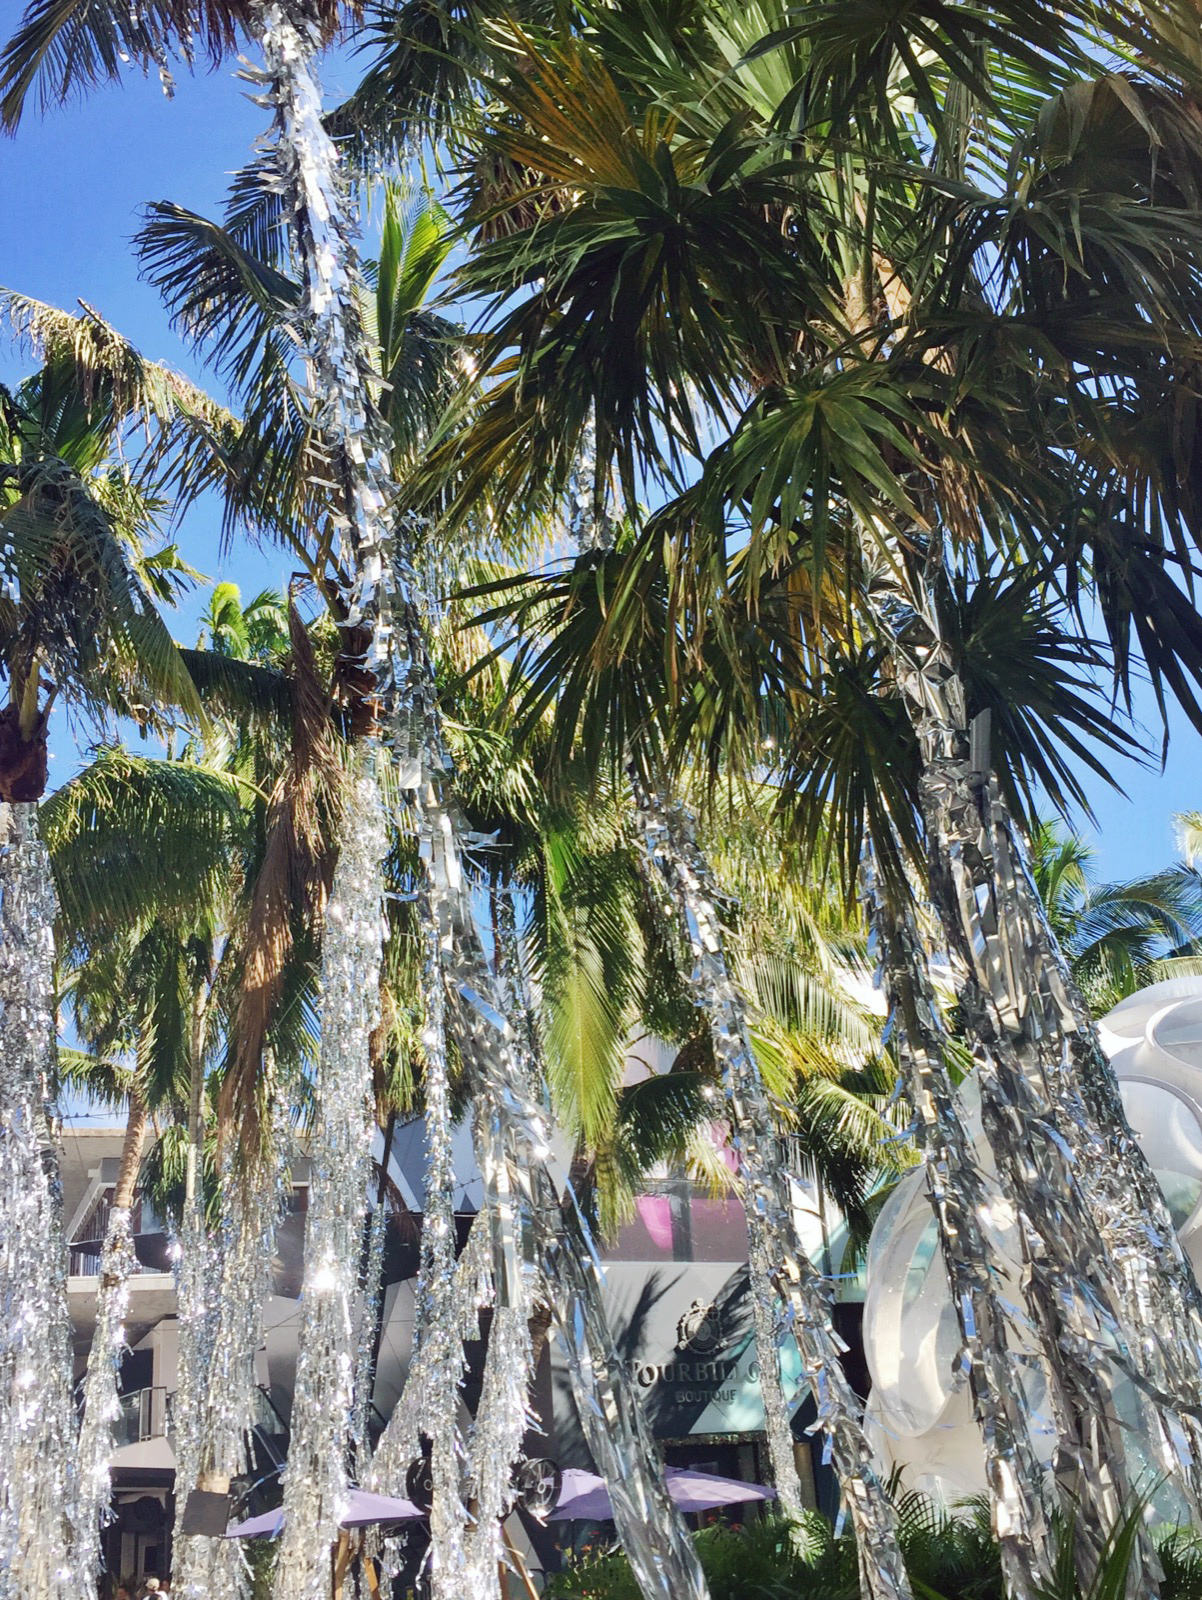 miami design district's palm trees get dressed up in tinsel during ...